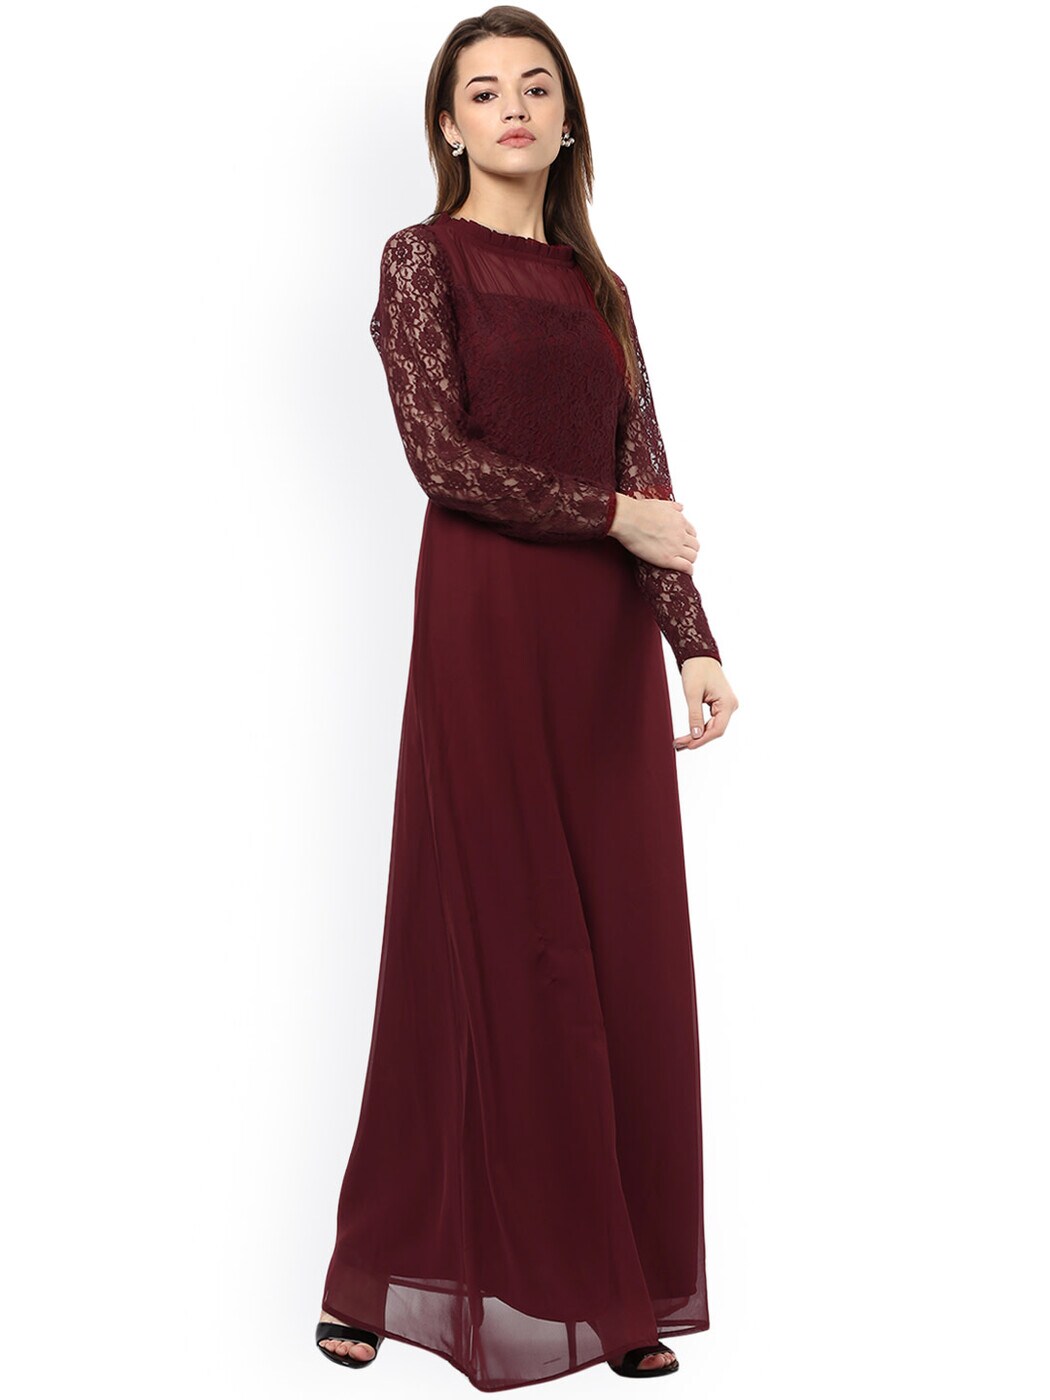 Satin Lace Burgundy Evening Gown with Illusion Sleeves – loveangeldress